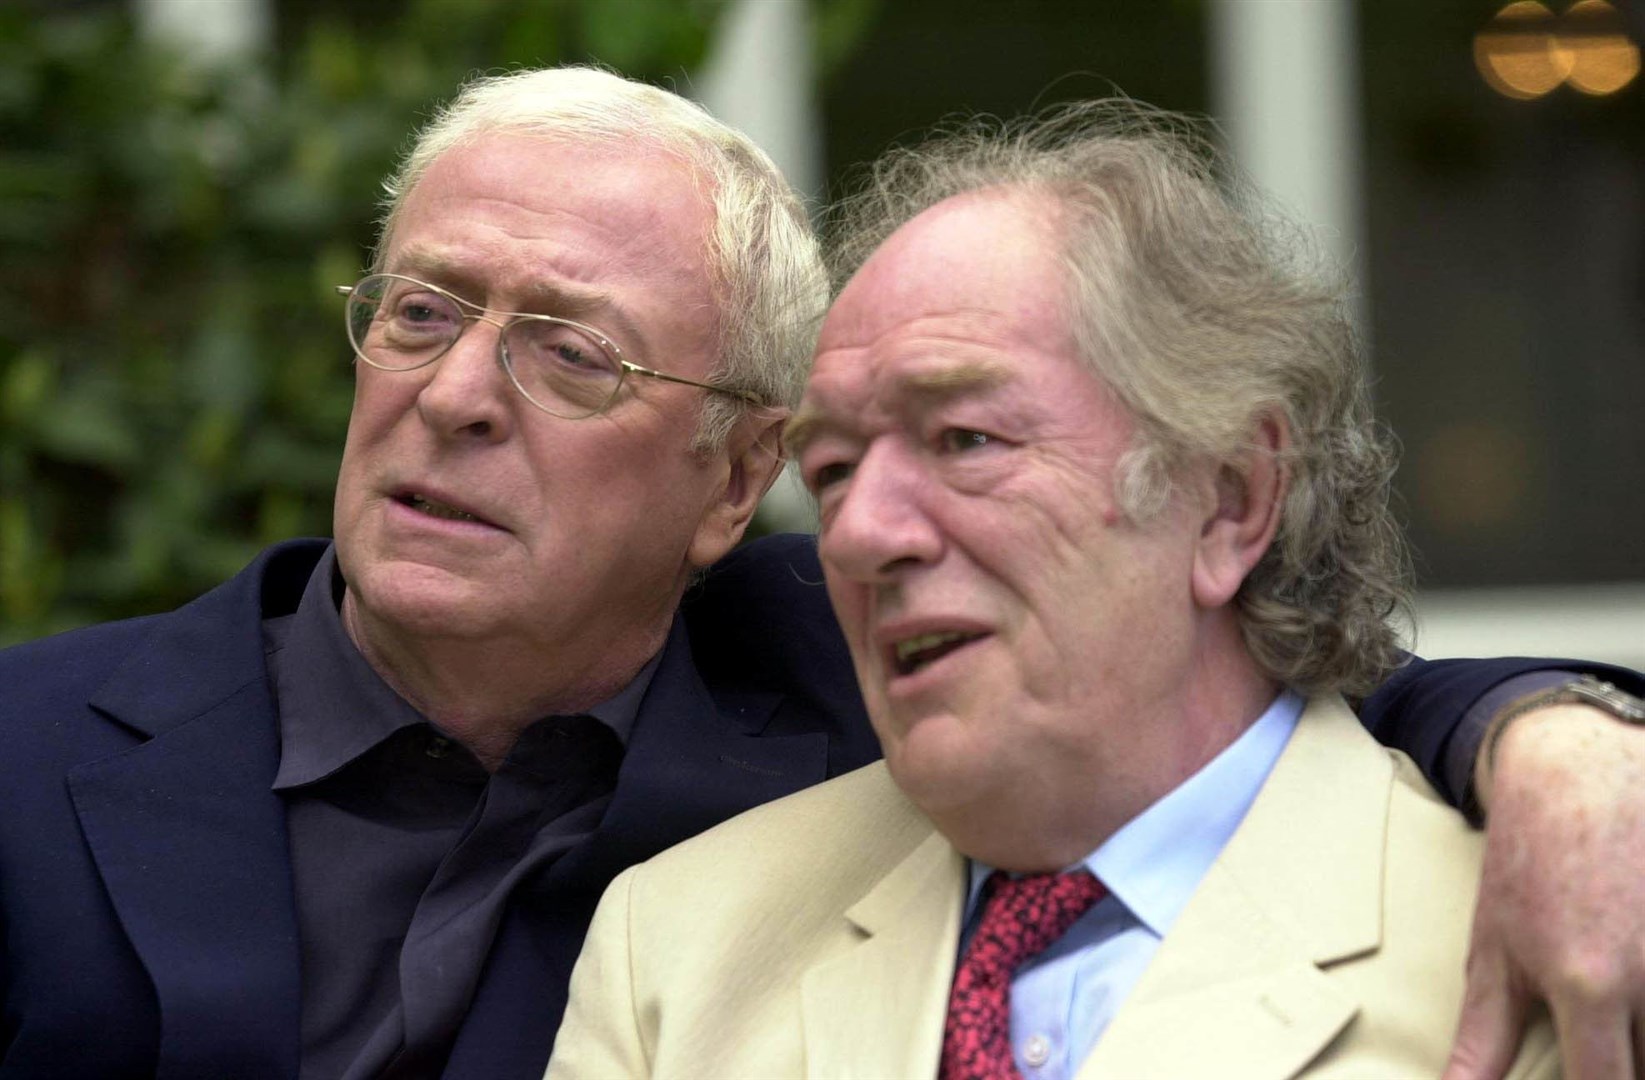 Sir Michael Caine and Sir Michael Gambon during a photocall at the Four Seasons Hotel in Dublin, Ireland, to promote film The Actors (Haydn West/PA)